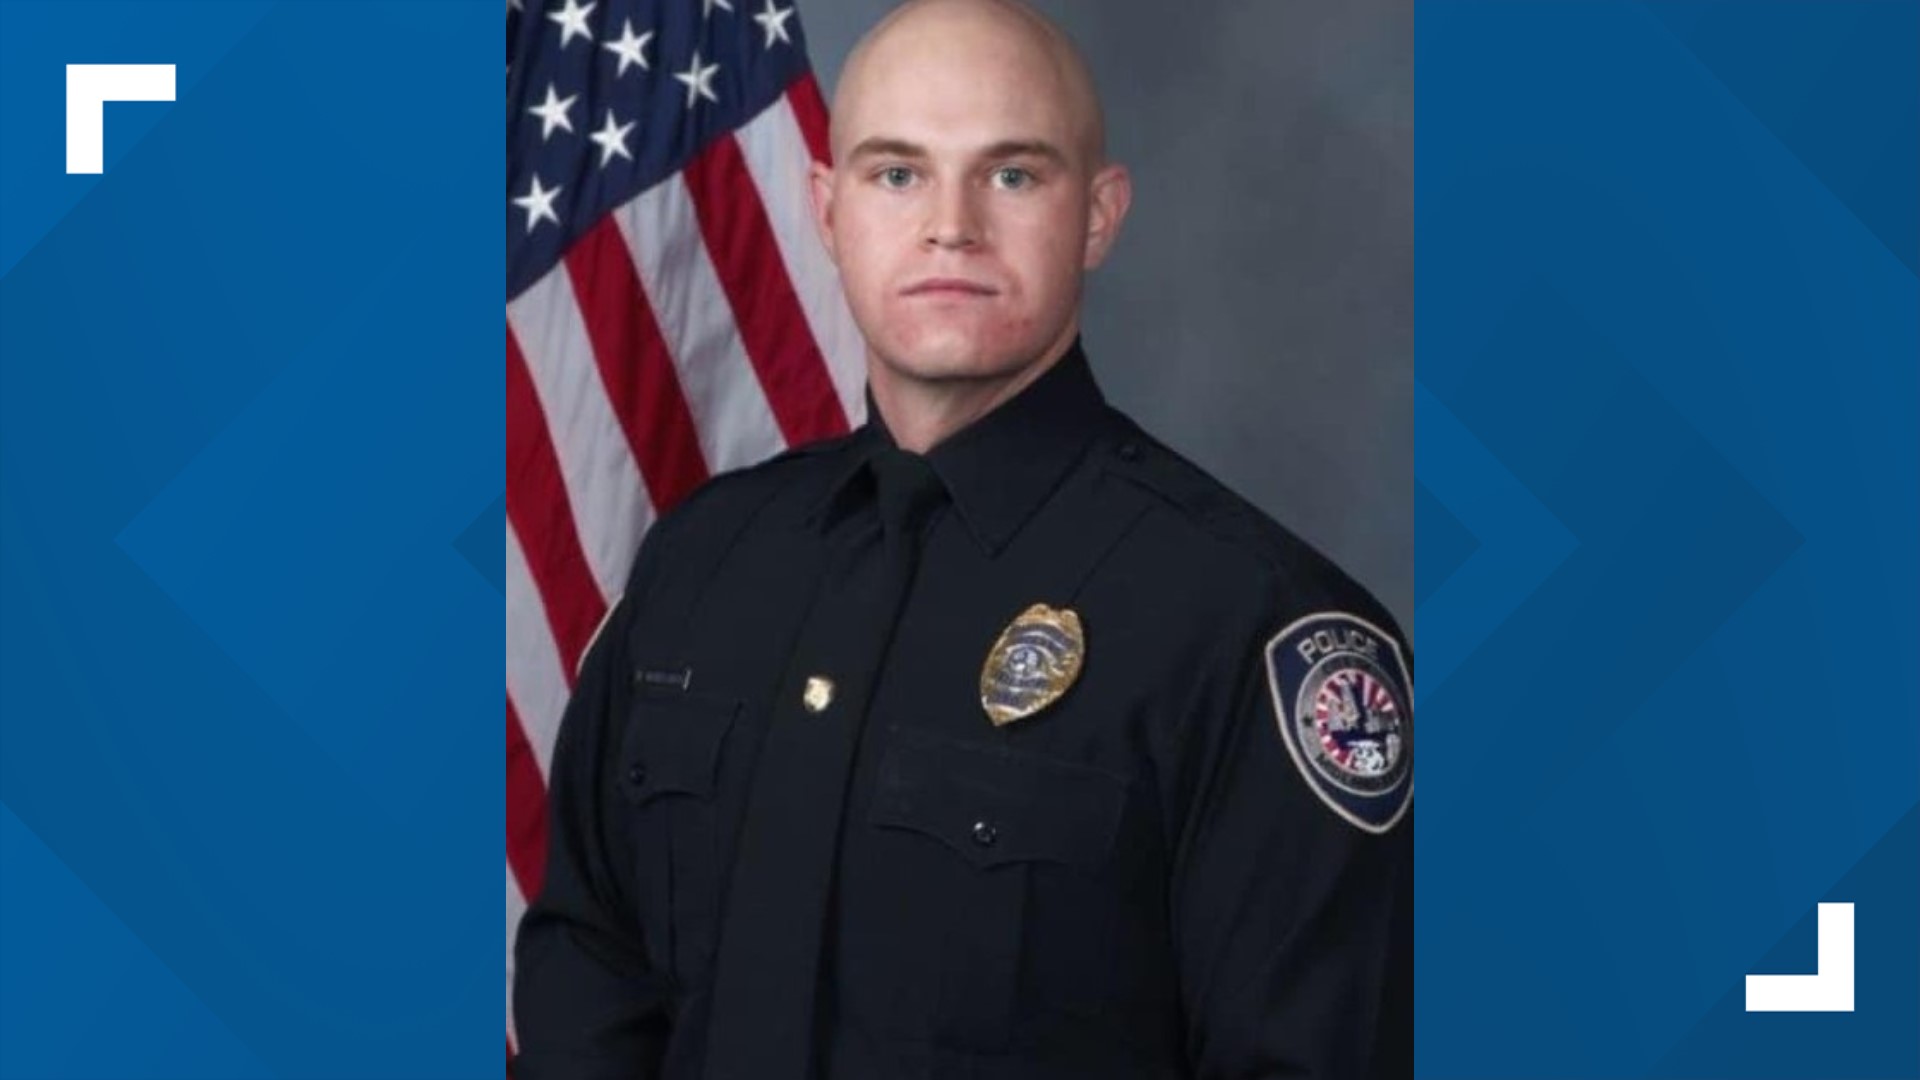 Officer Heidelberg was killed on March 5, 2019. Over two years later, his accused killer is about to face trial.